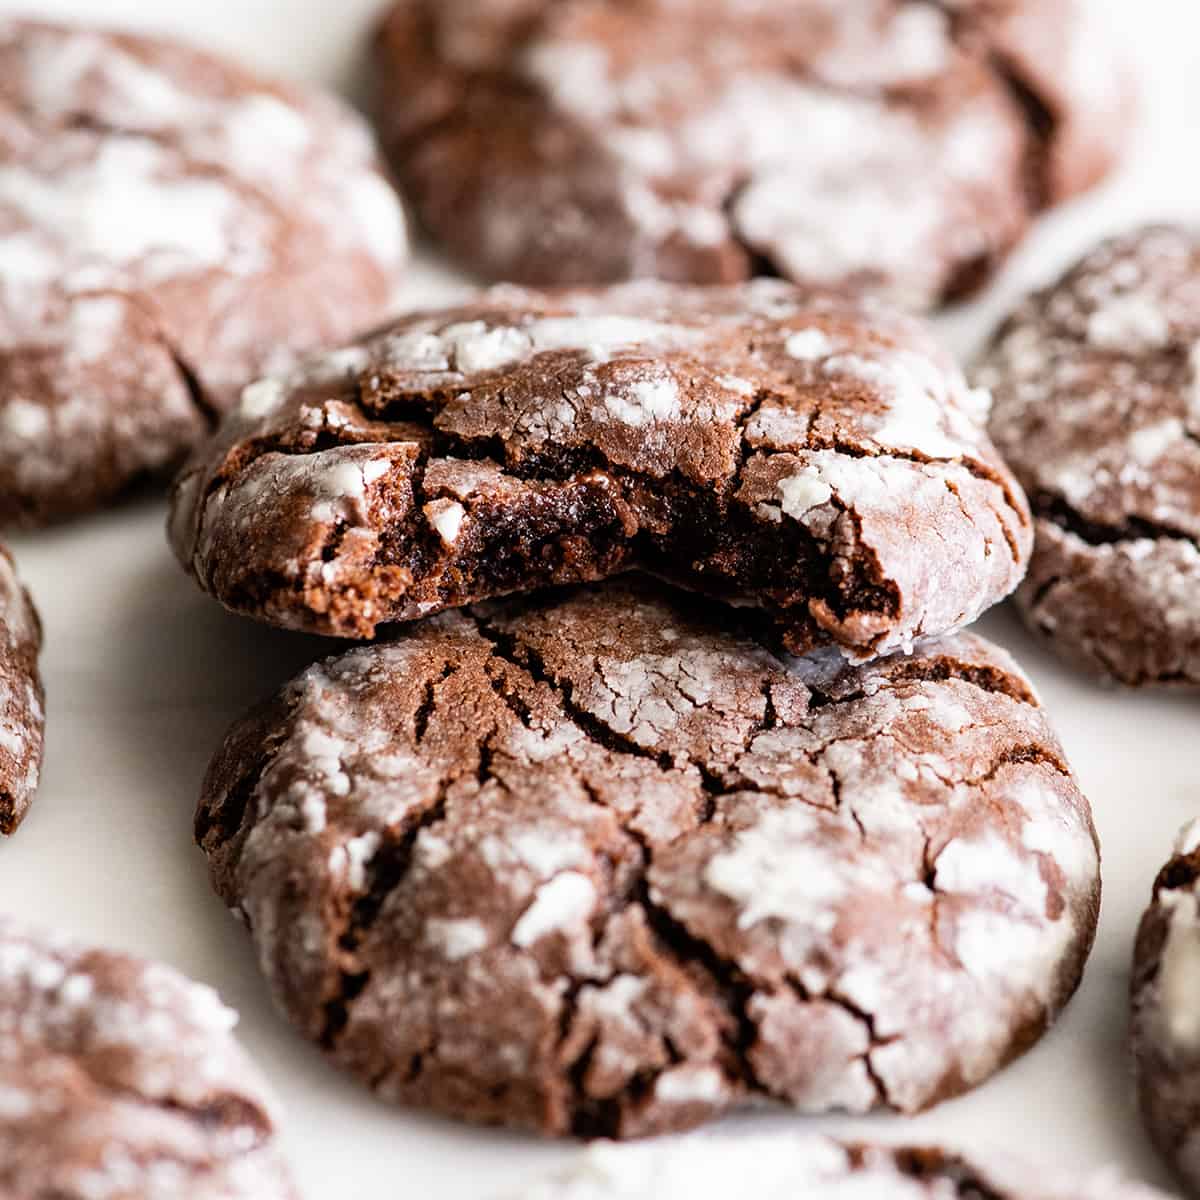 front view of a Chocolate Crinkle Cookie with a bite taken out of it